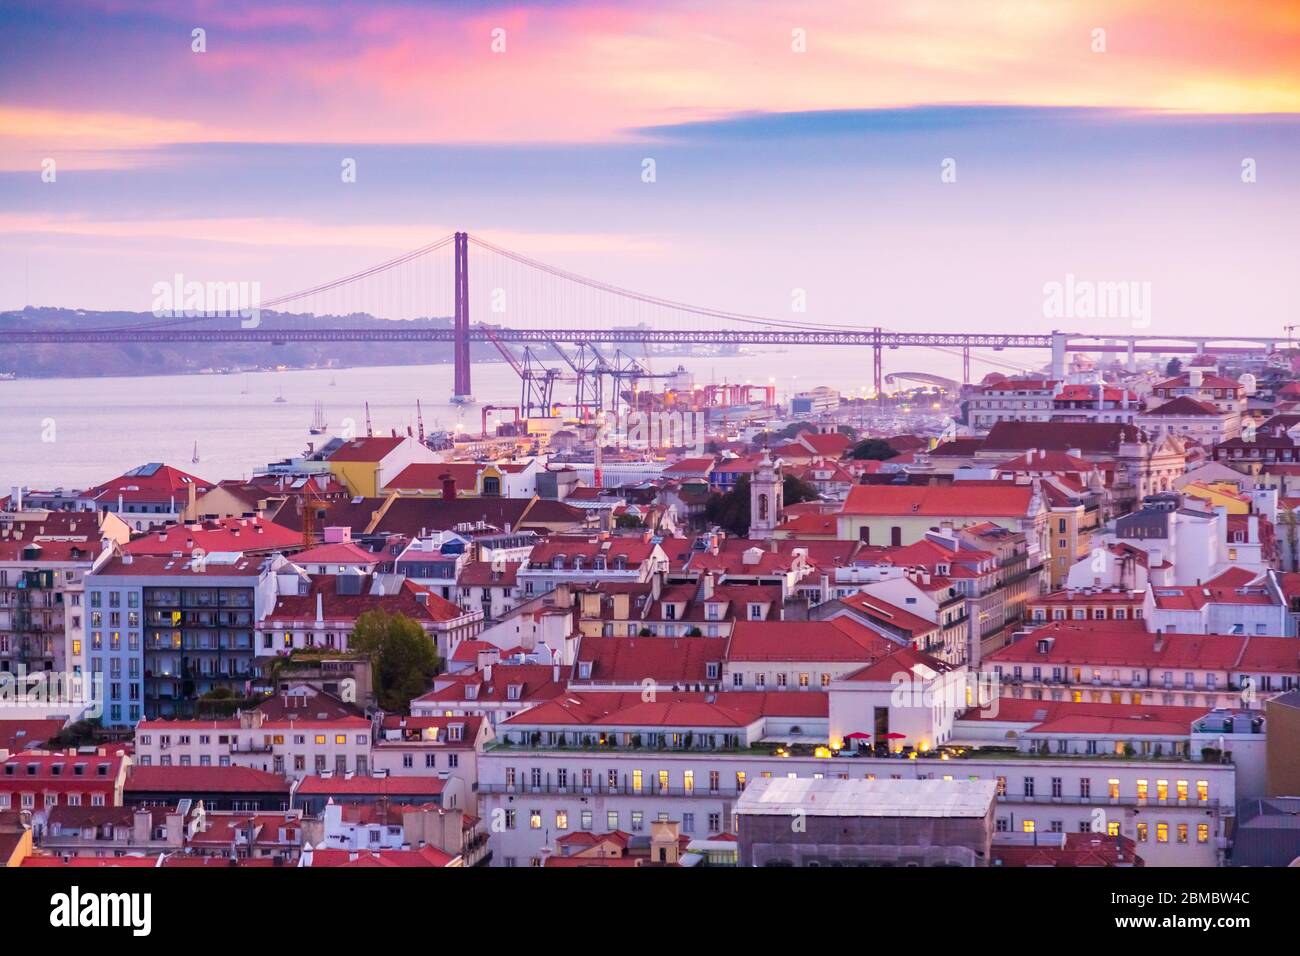 25 de Abril bridge during sunset seen from Sao Jorge Castle in city of Lisbon, Portugal Stock Photo